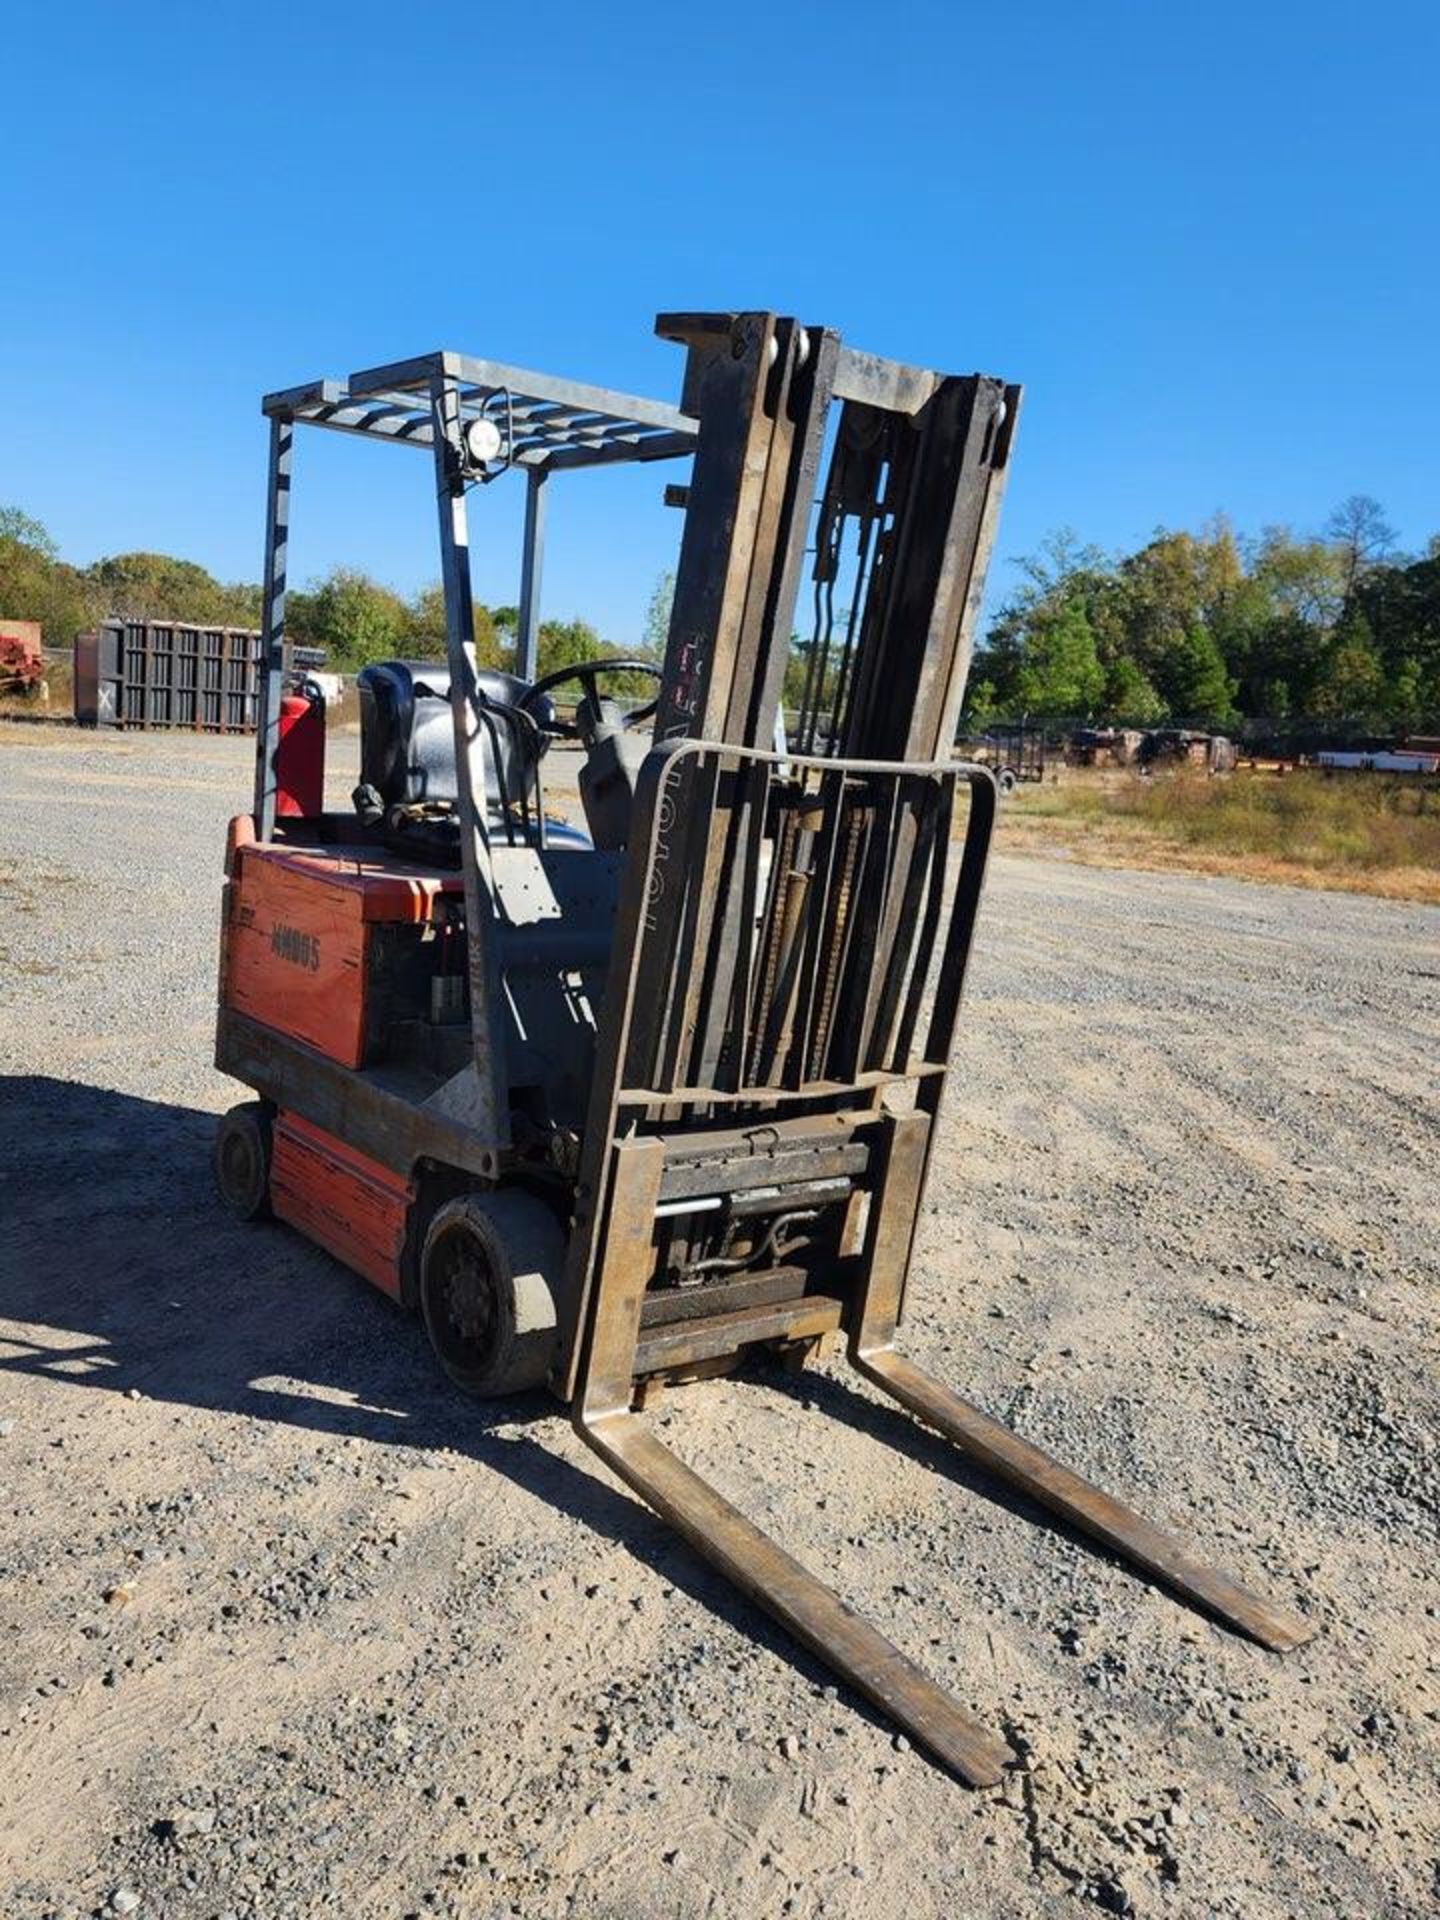 Toyota 30-5FBC15 Ele Forklift 3-Stage Mast; 185" Max Lift ht.; Hrs: 32,982.1; W/ Charger